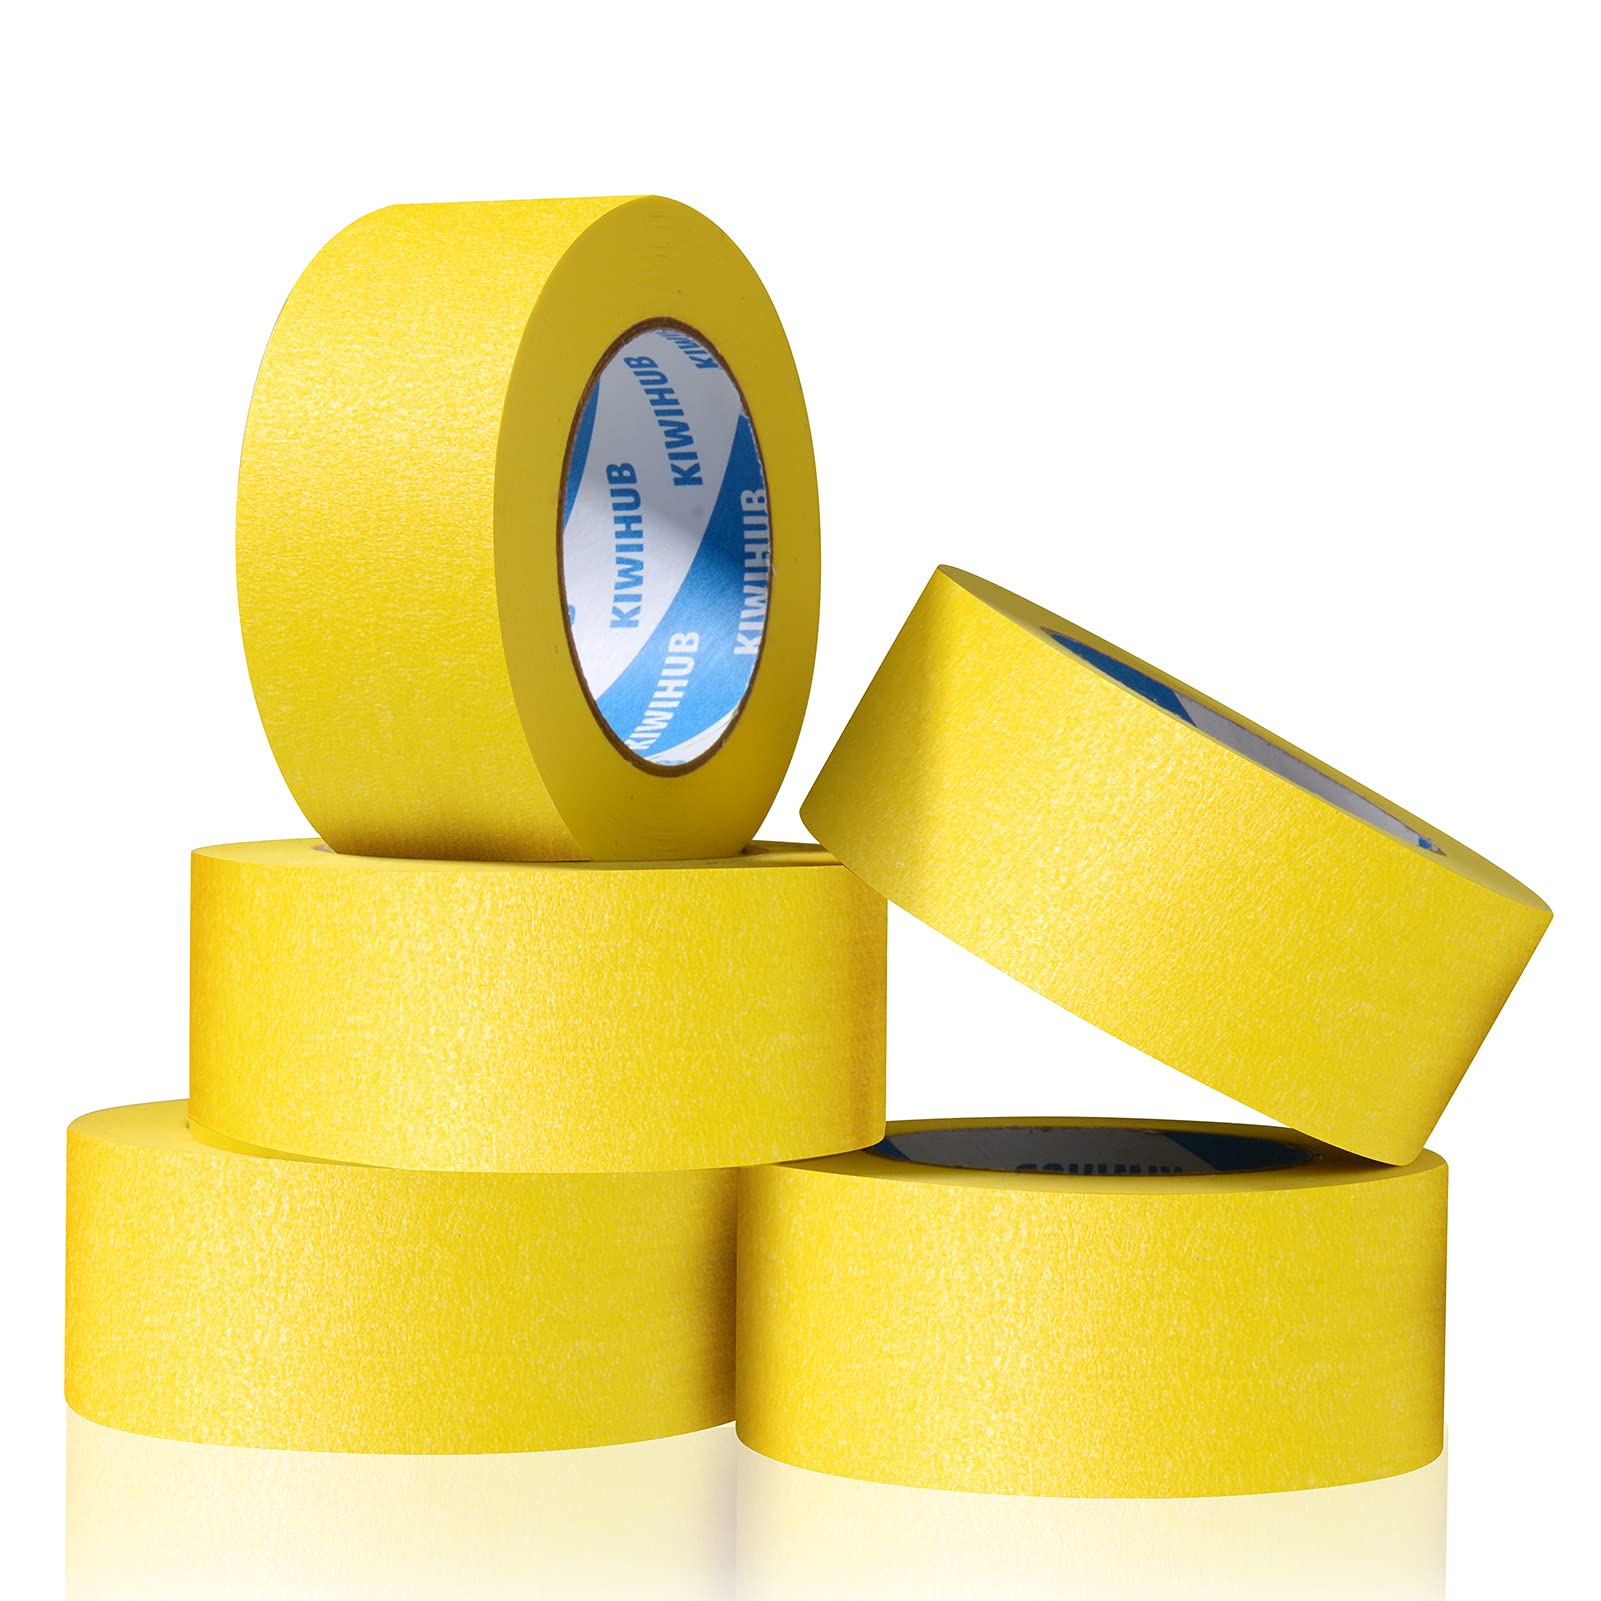 KIWIHUB Yellow Painters Tape 2 x 60 Yards x 5 Rolls (300 Yards Total) -  Medium Adhesive Masking Tape for Painting Labeling DIY Crafting Decoration  and School Projects 2 60 yards Yellow 5